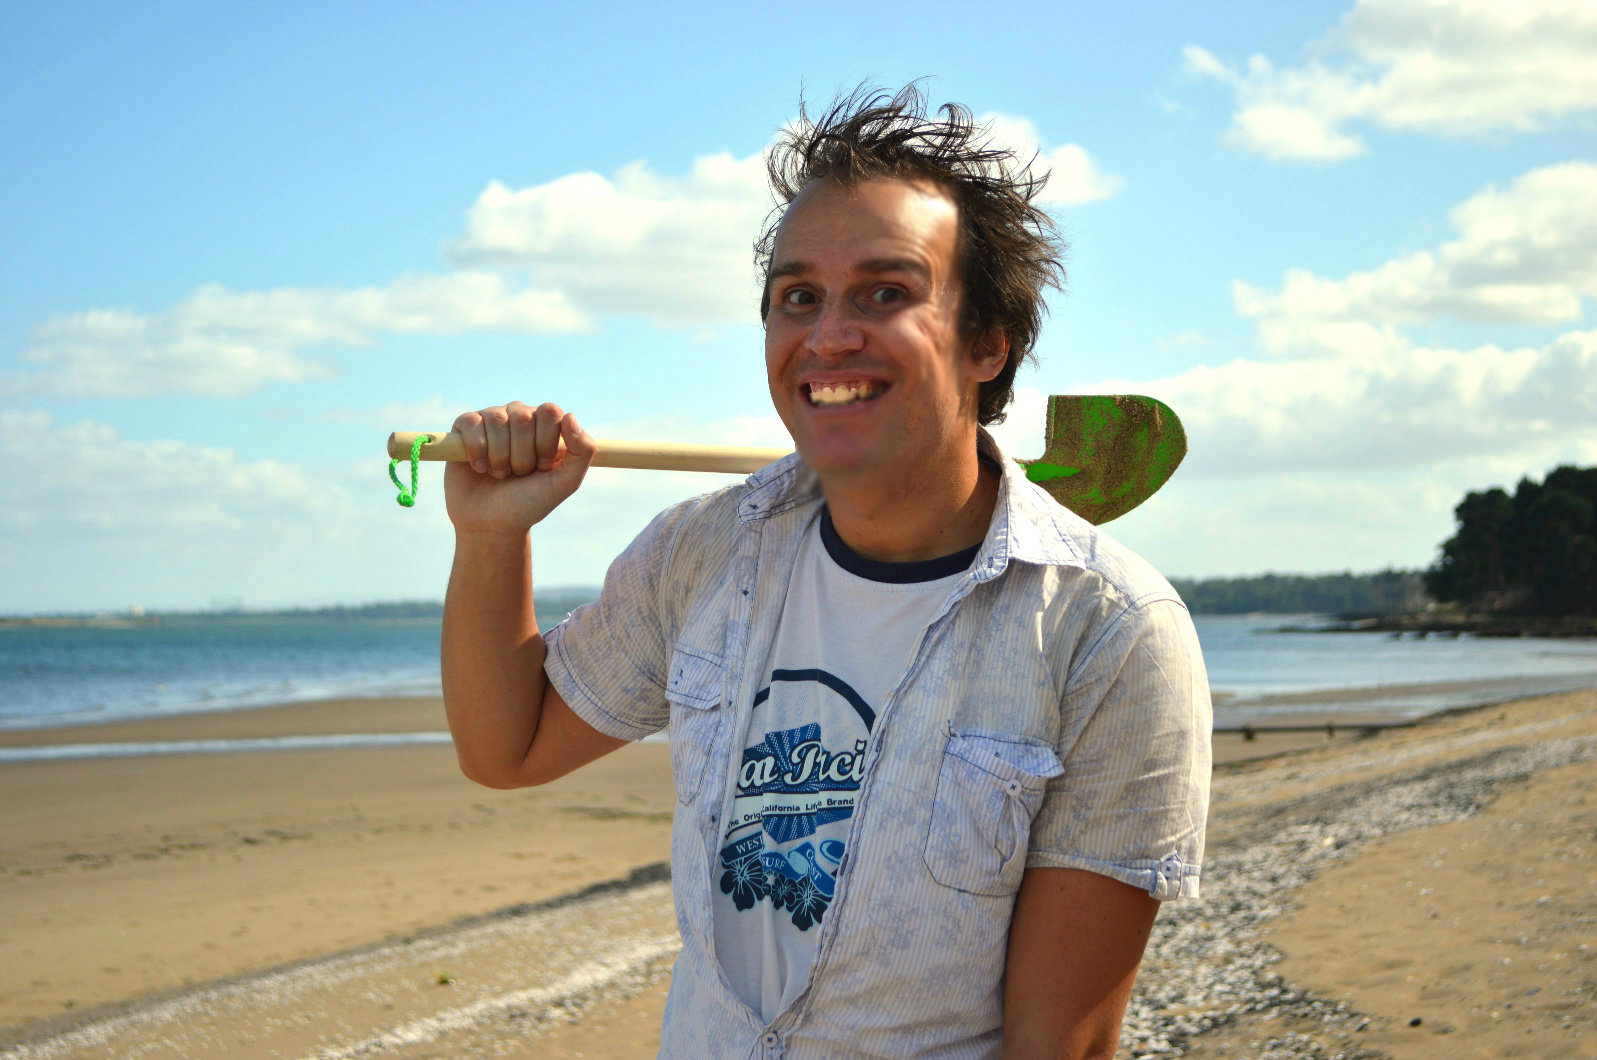 Shawn Watson poses for a photograph while on location at Hound Point Beach.